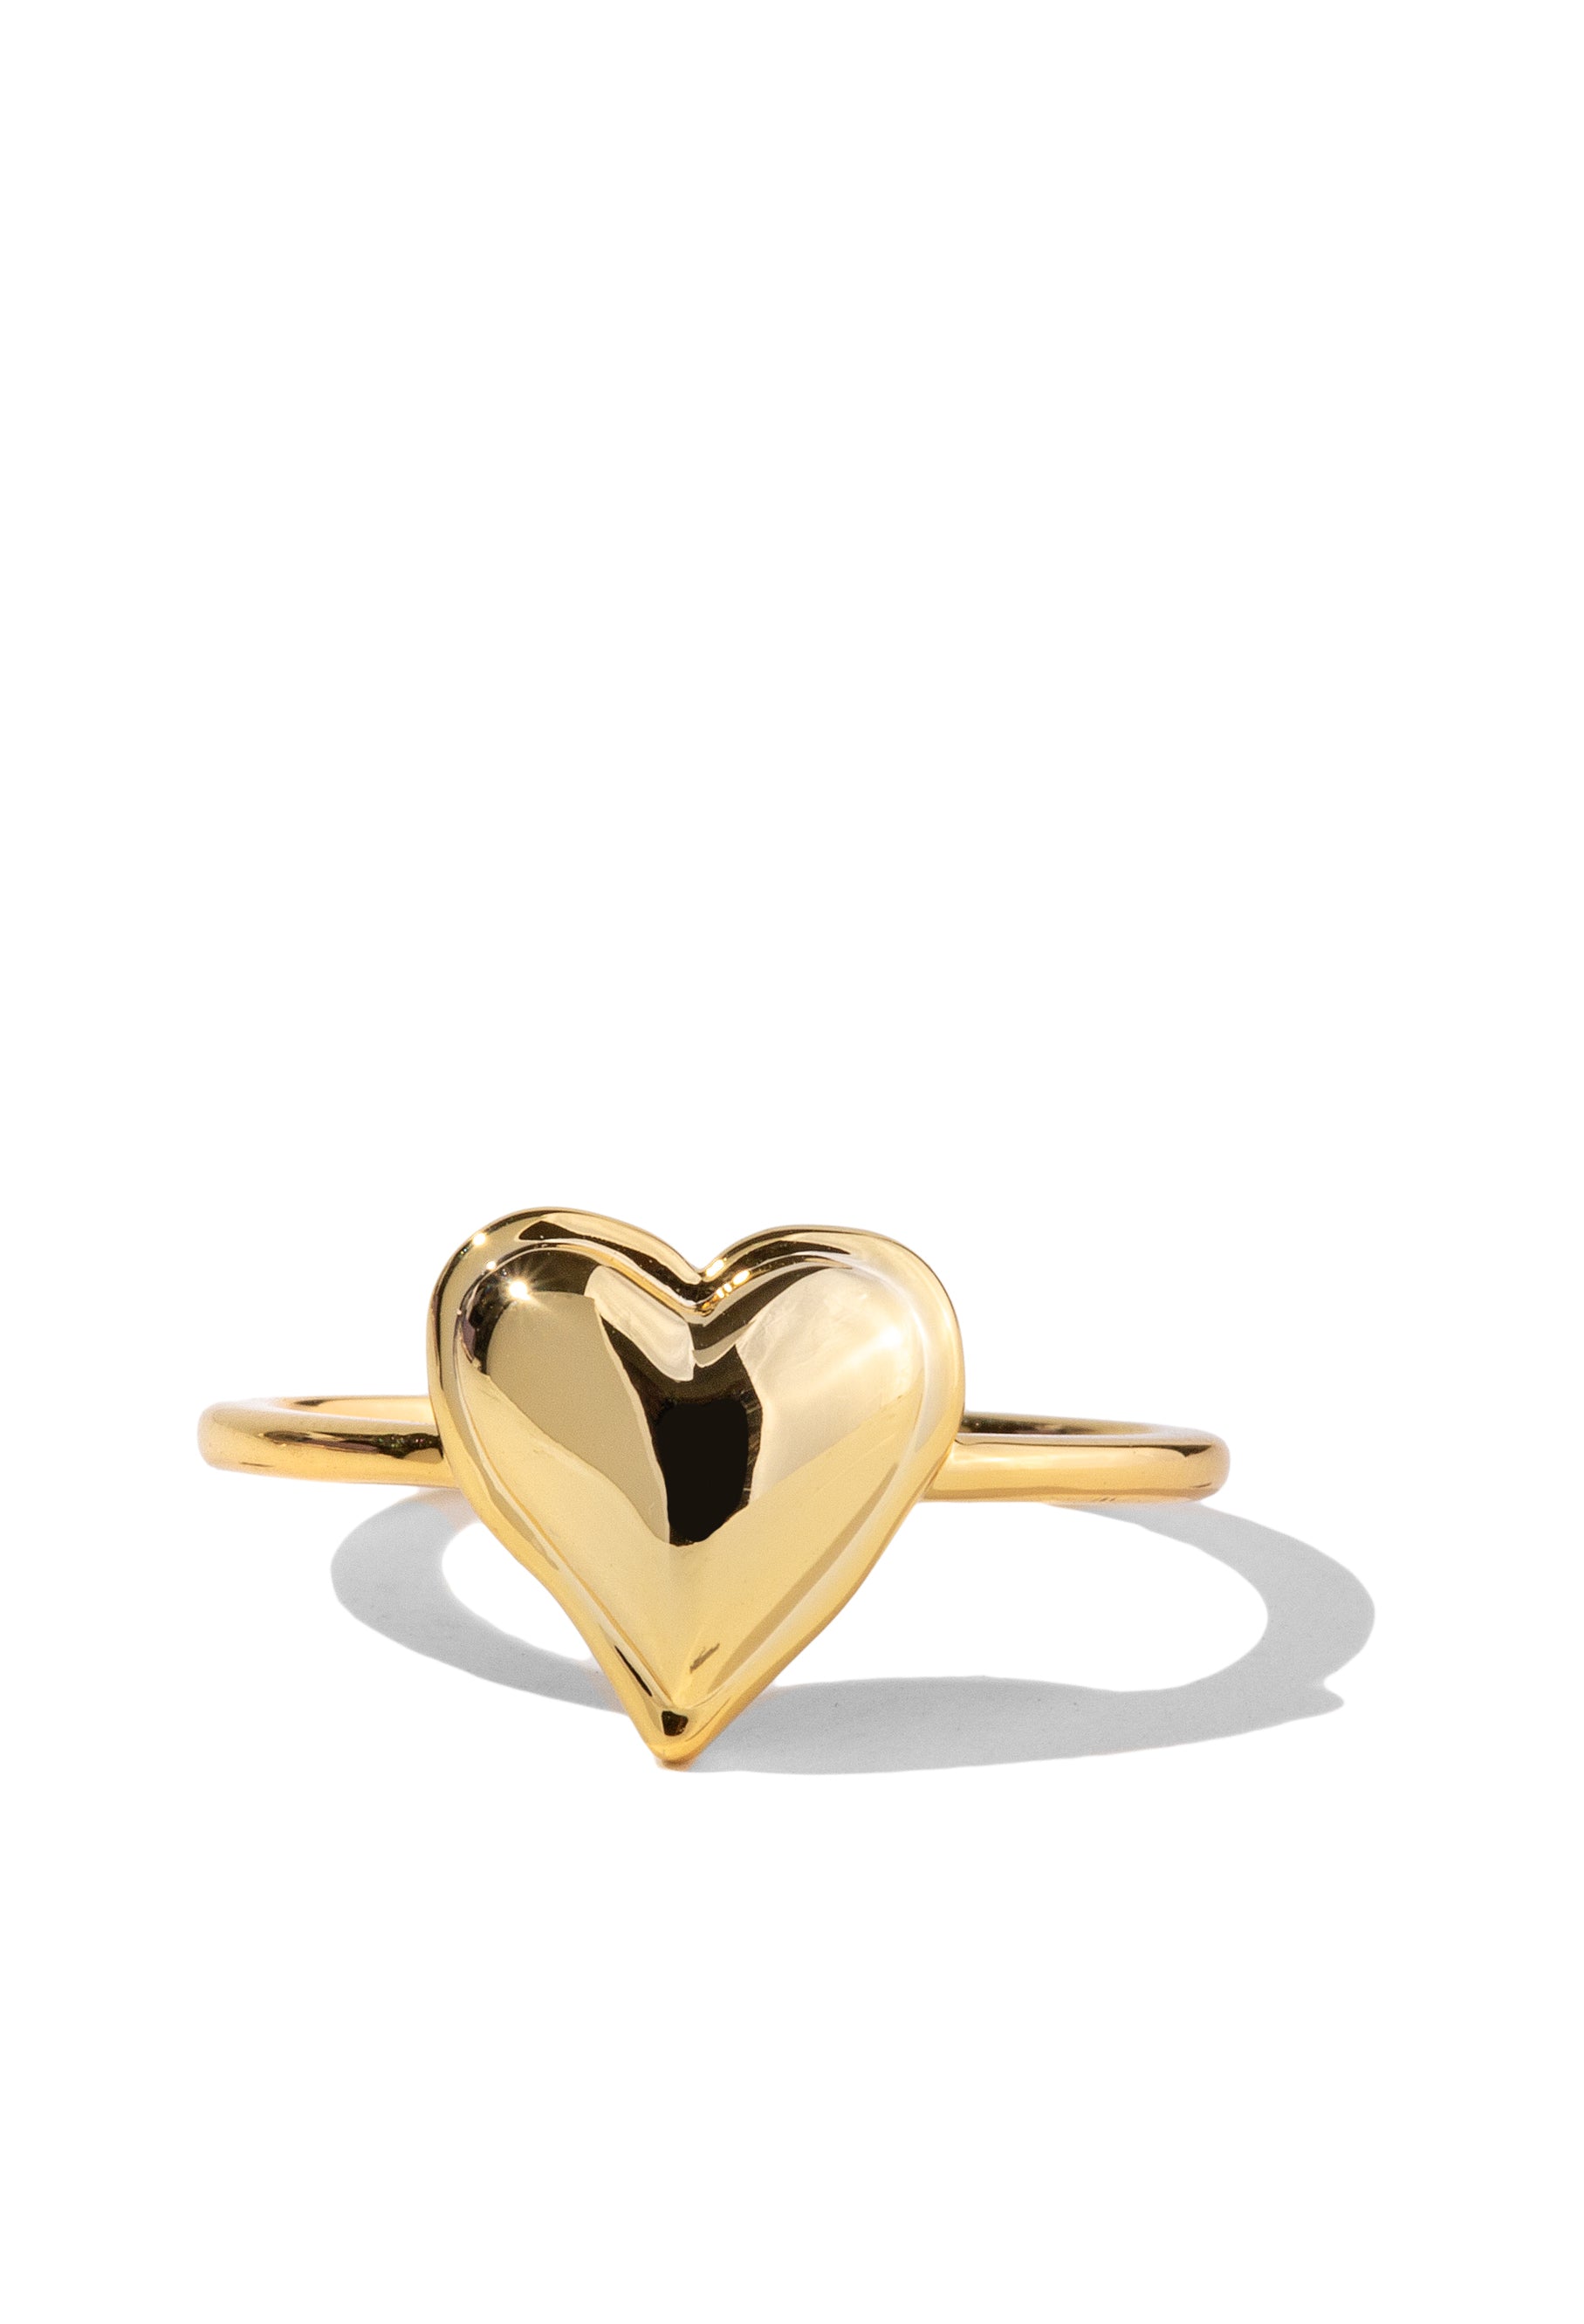 Puffy Gold Heart Ring | by Oomiay – Oomiay Jewelry